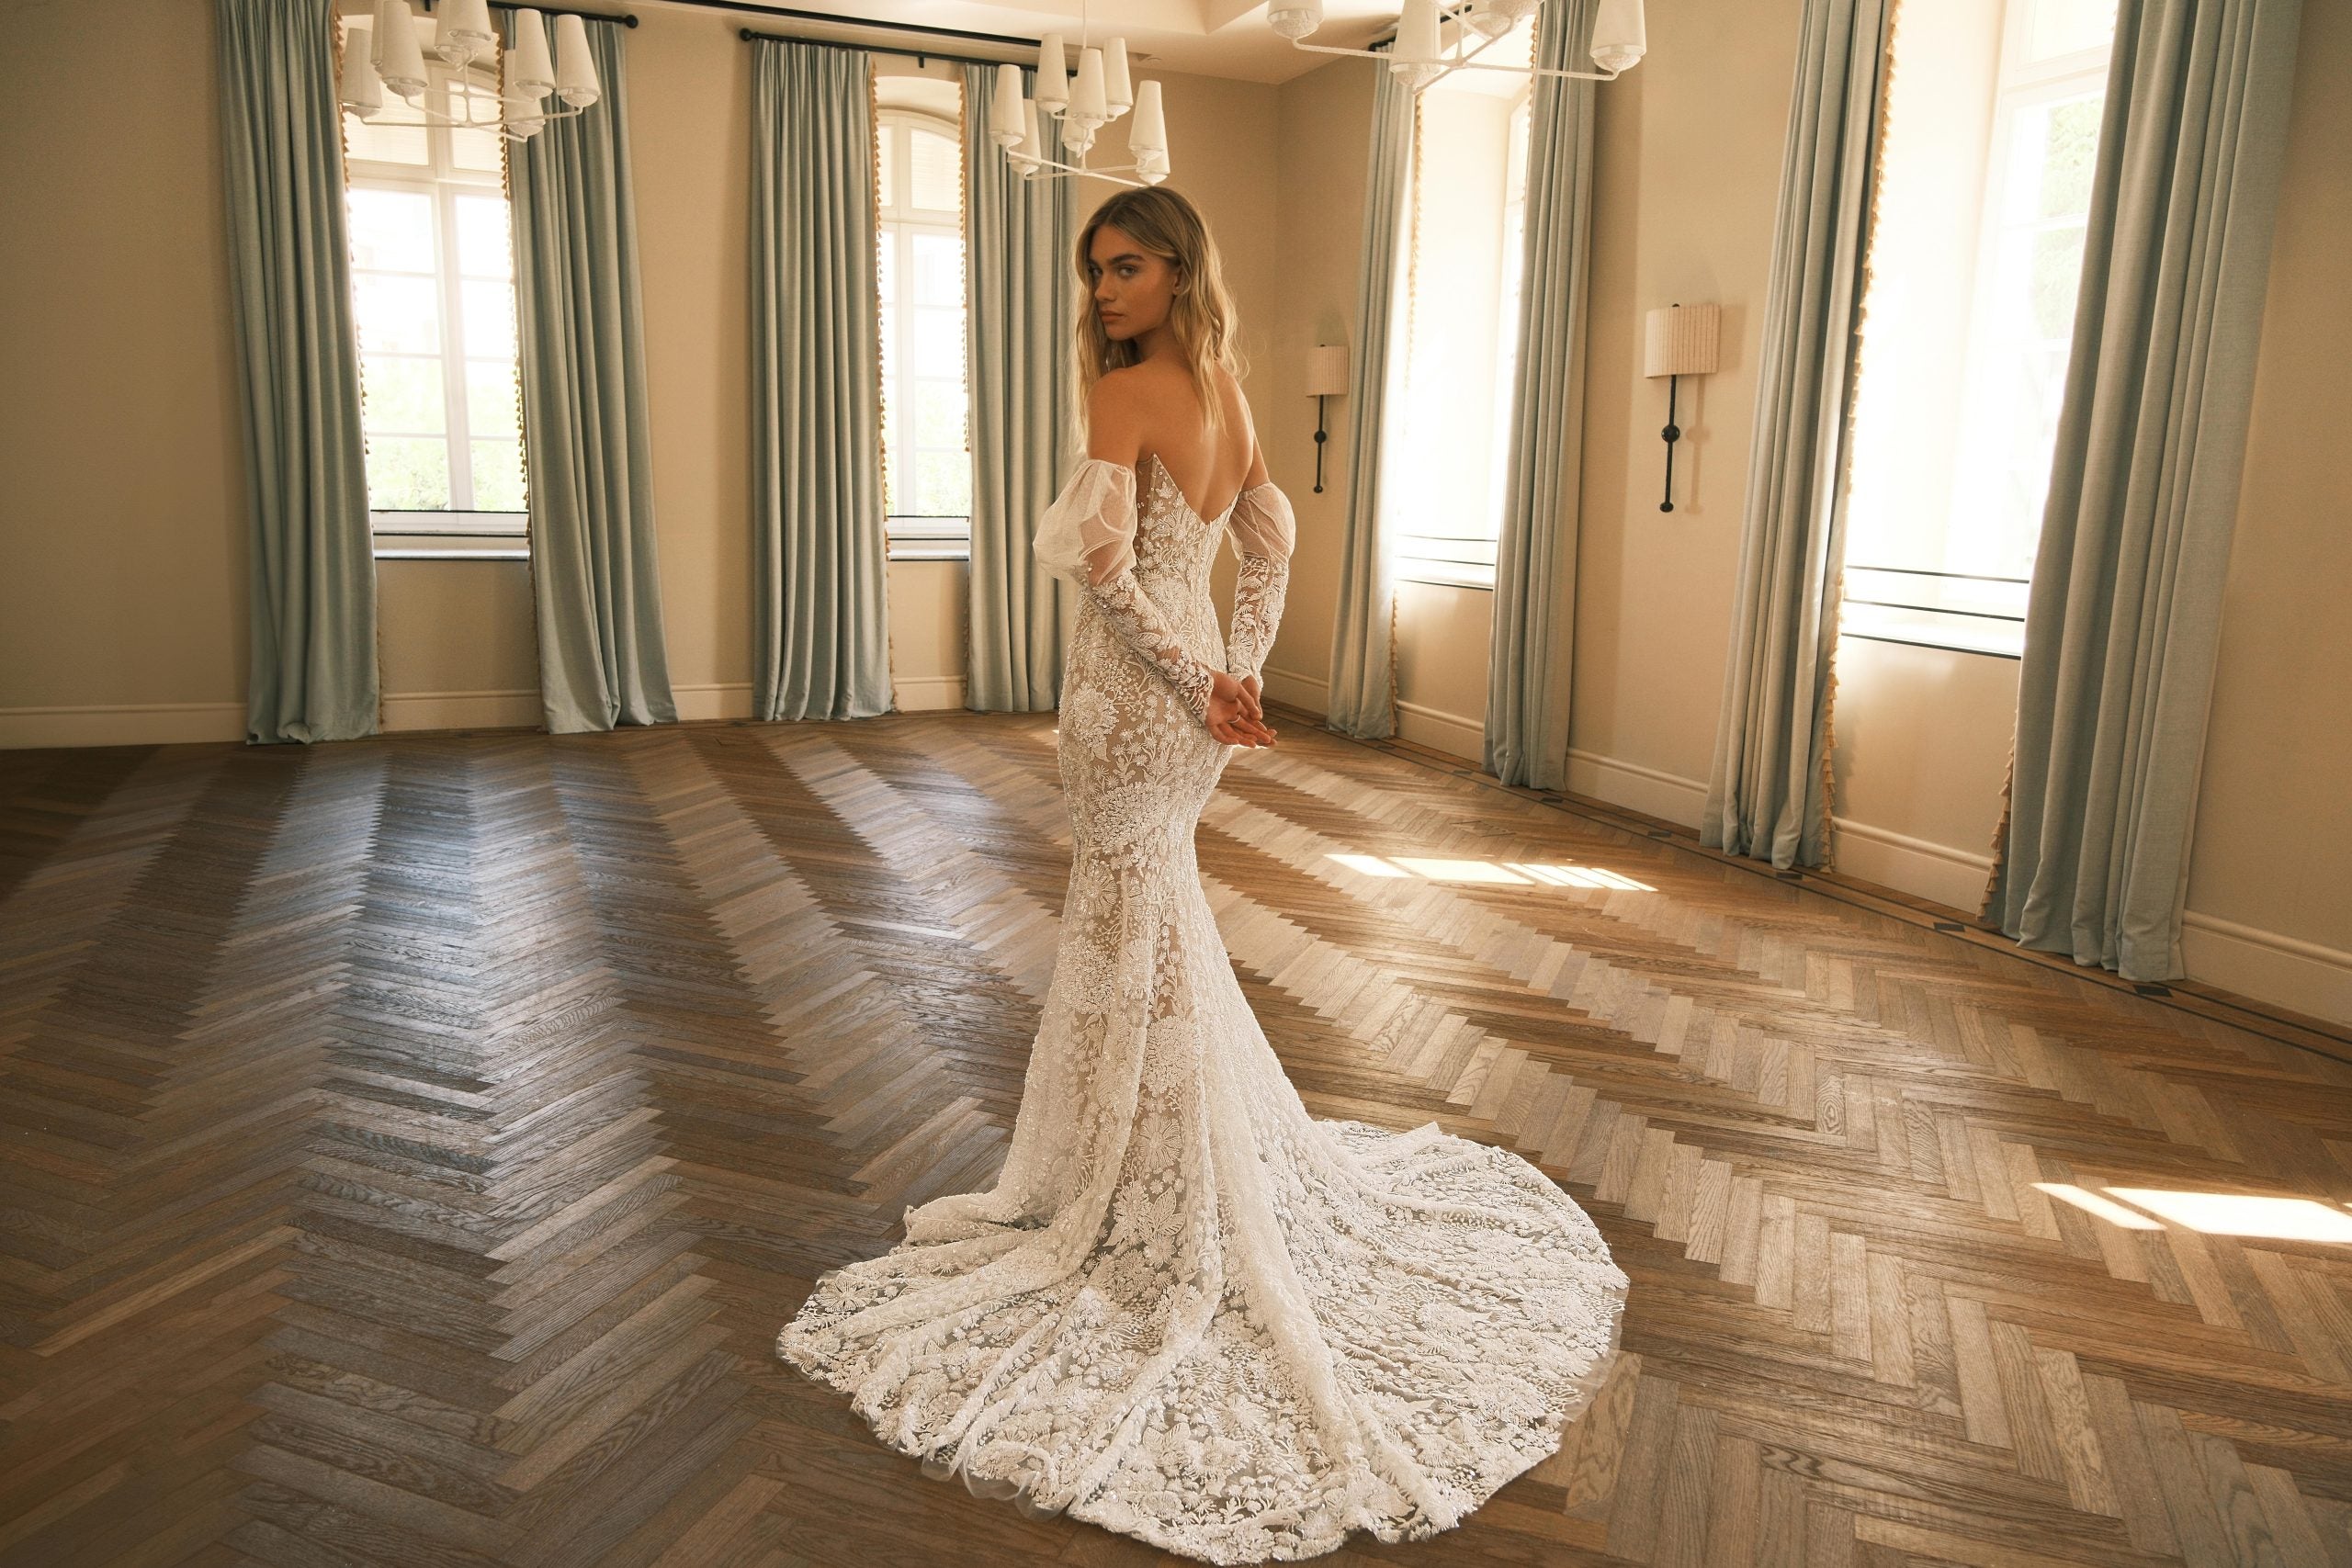 Strapless Lace Fit-and-Flare Gown With Detachable Sleeves by Lee Petra Grebenau - Image 2